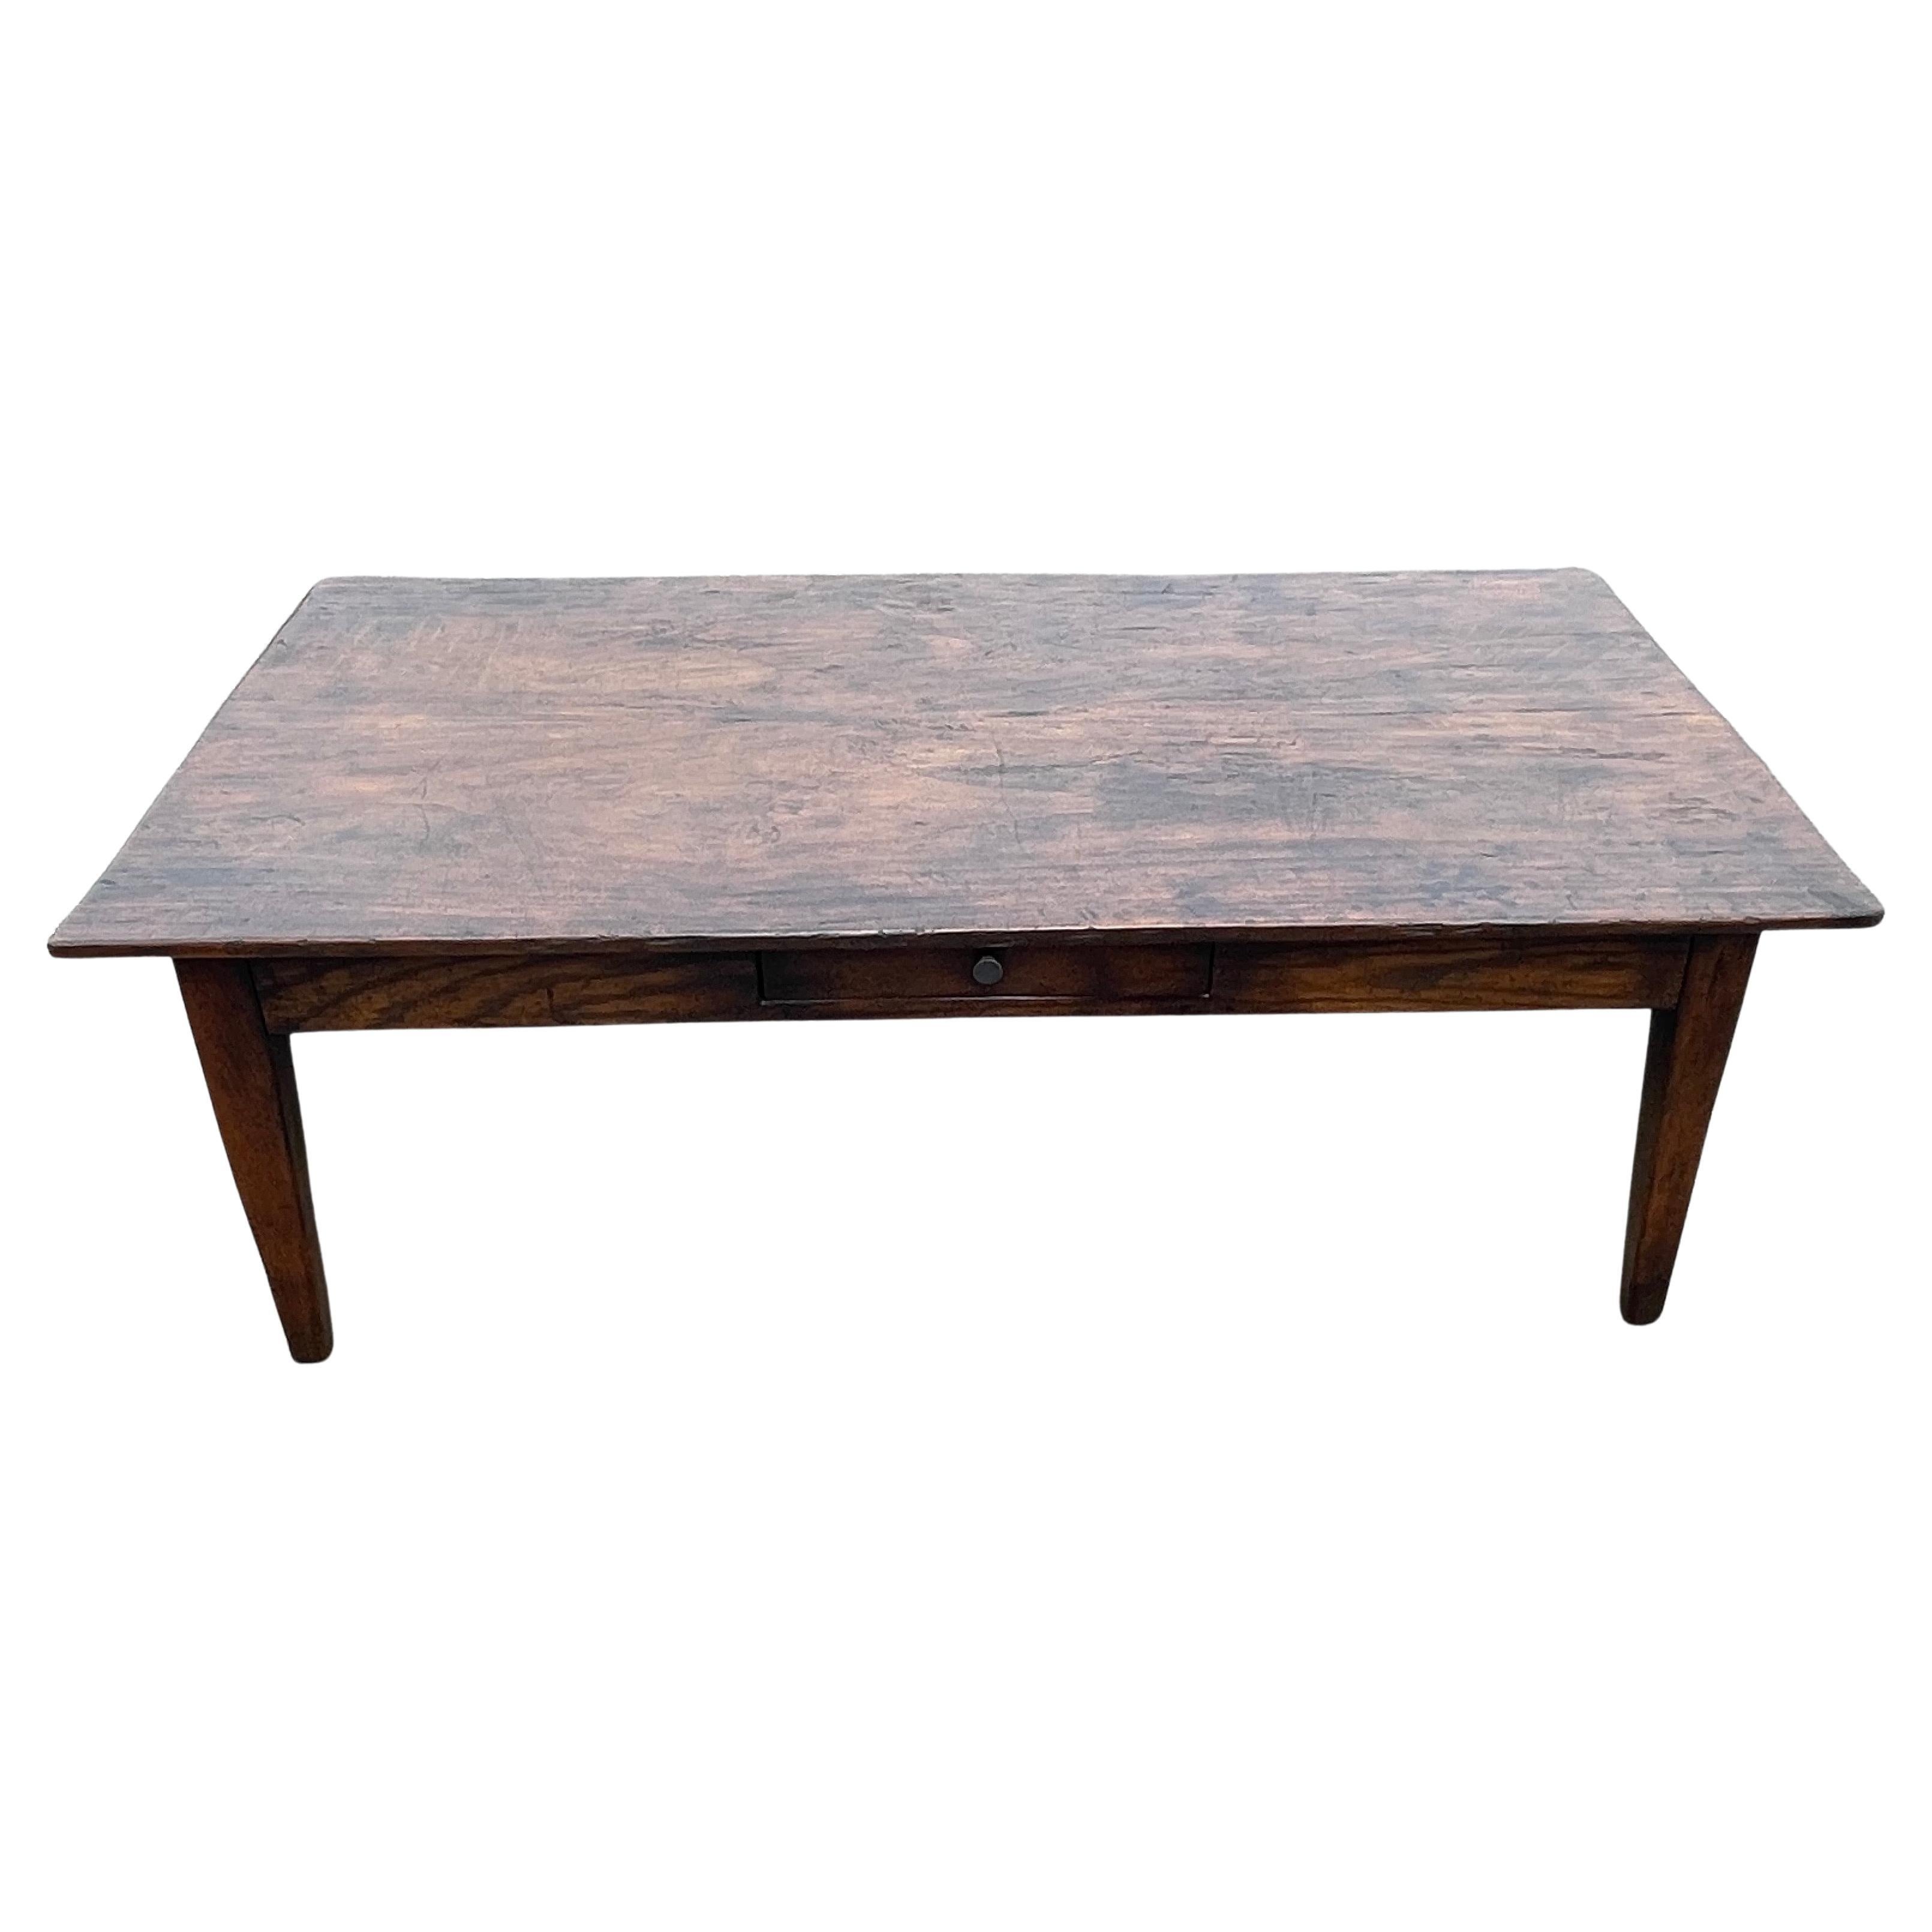 Large English Oak Coffee Table with Single Drawer